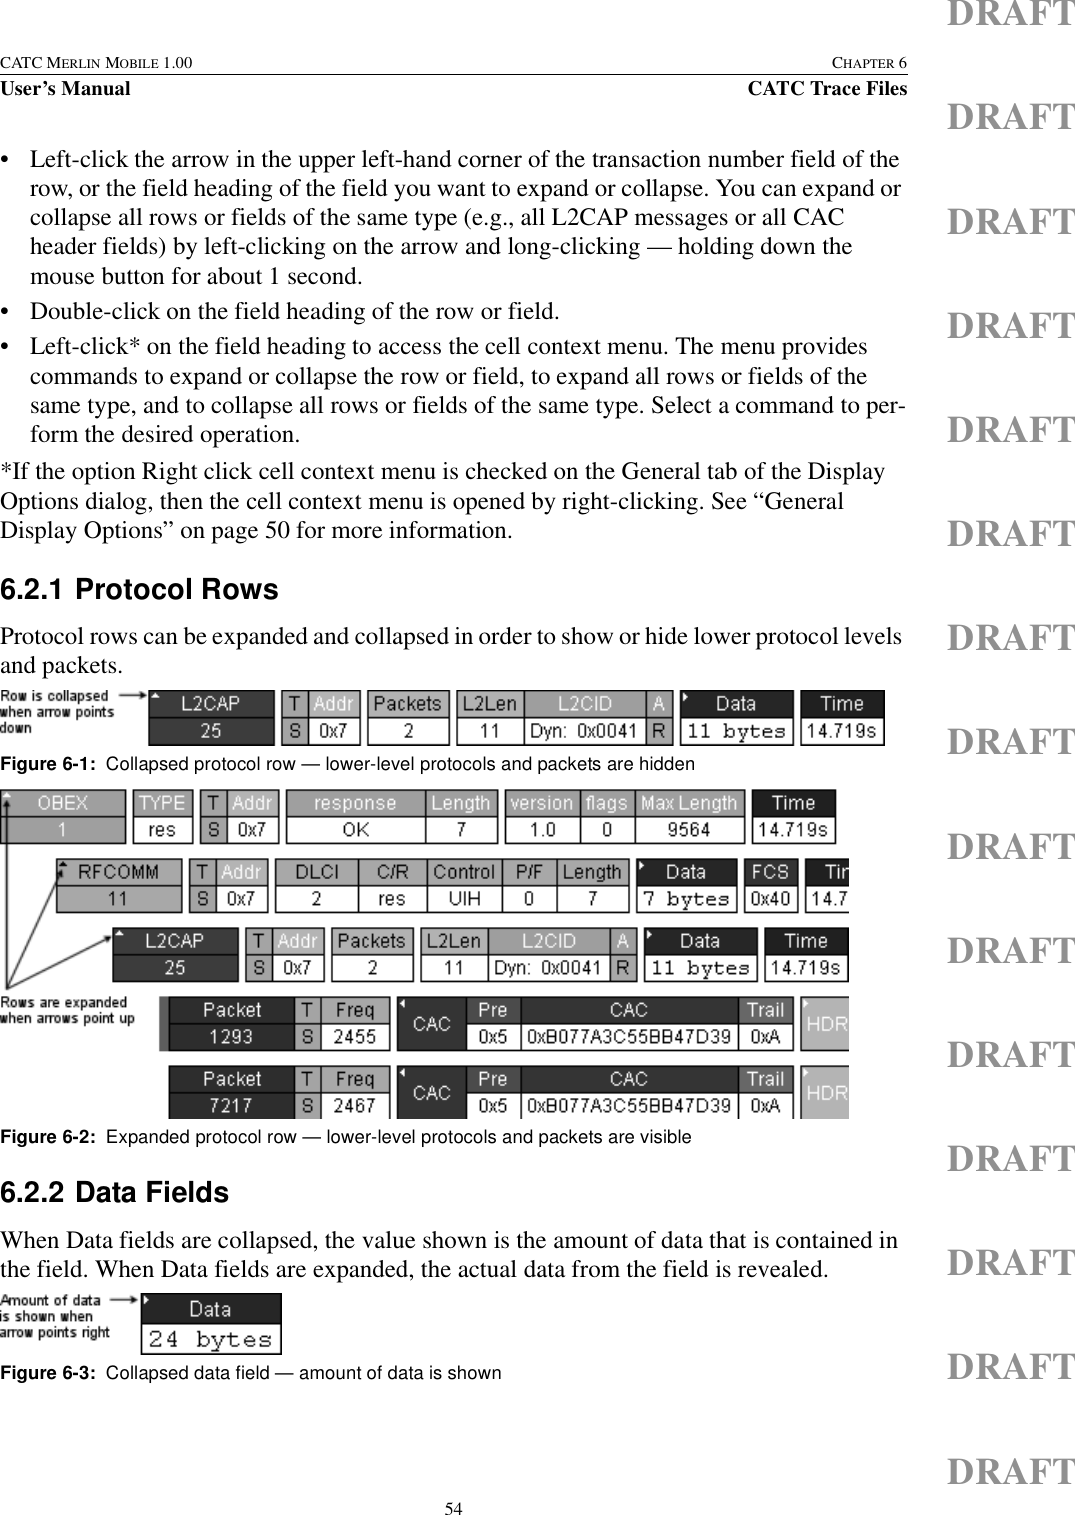 54CATC MERLIN MOBILE 1.00 CHAPTER 6User’s Manual CATC Trace FilesDRAFTDRAFTDRAFTDRAFTDRAFTDRAFTDRAFTDRAFTDRAFTDRAFTDRAFTDRAFTDRAFTDRAFTDRAFT• Left-click the arrow in the upper left-hand corner of the transaction number field of the row, or the field heading of the field you want to expand or collapse. You can expand or collapse all rows or fields of the same type (e.g., all L2CAP messages or all CAC header fields) by left-clicking on the arrow and long-clicking — holding down the mouse button for about 1 second.• Double-click on the field heading of the row or field.• Left-click* on the field heading to access the cell context menu. The menu provides commands to expand or collapse the row or field, to expand all rows or fields of the same type, and to collapse all rows or fields of the same type. Select a command to per-form the desired operation.*If the option Right click cell context menu is checked on the General tab of the Display Options dialog, then the cell context menu is opened by right-clicking. See “General Display Options” on page 50 for more information.6.2.1 Protocol RowsProtocol rows can be expanded and collapsed in order to show or hide lower protocol levels and packets. 6.2.2 Data FieldsWhen Data fields are collapsed, the value shown is the amount of data that is contained in the field. When Data fields are expanded, the actual data from the field is revealed. Figure 6-1:  Collapsed protocol row — lower-level protocols and packets are hiddenFigure 6-2:  Expanded protocol row — lower-level protocols and packets are visibleFigure 6-3:  Collapsed data field — amount of data is shown